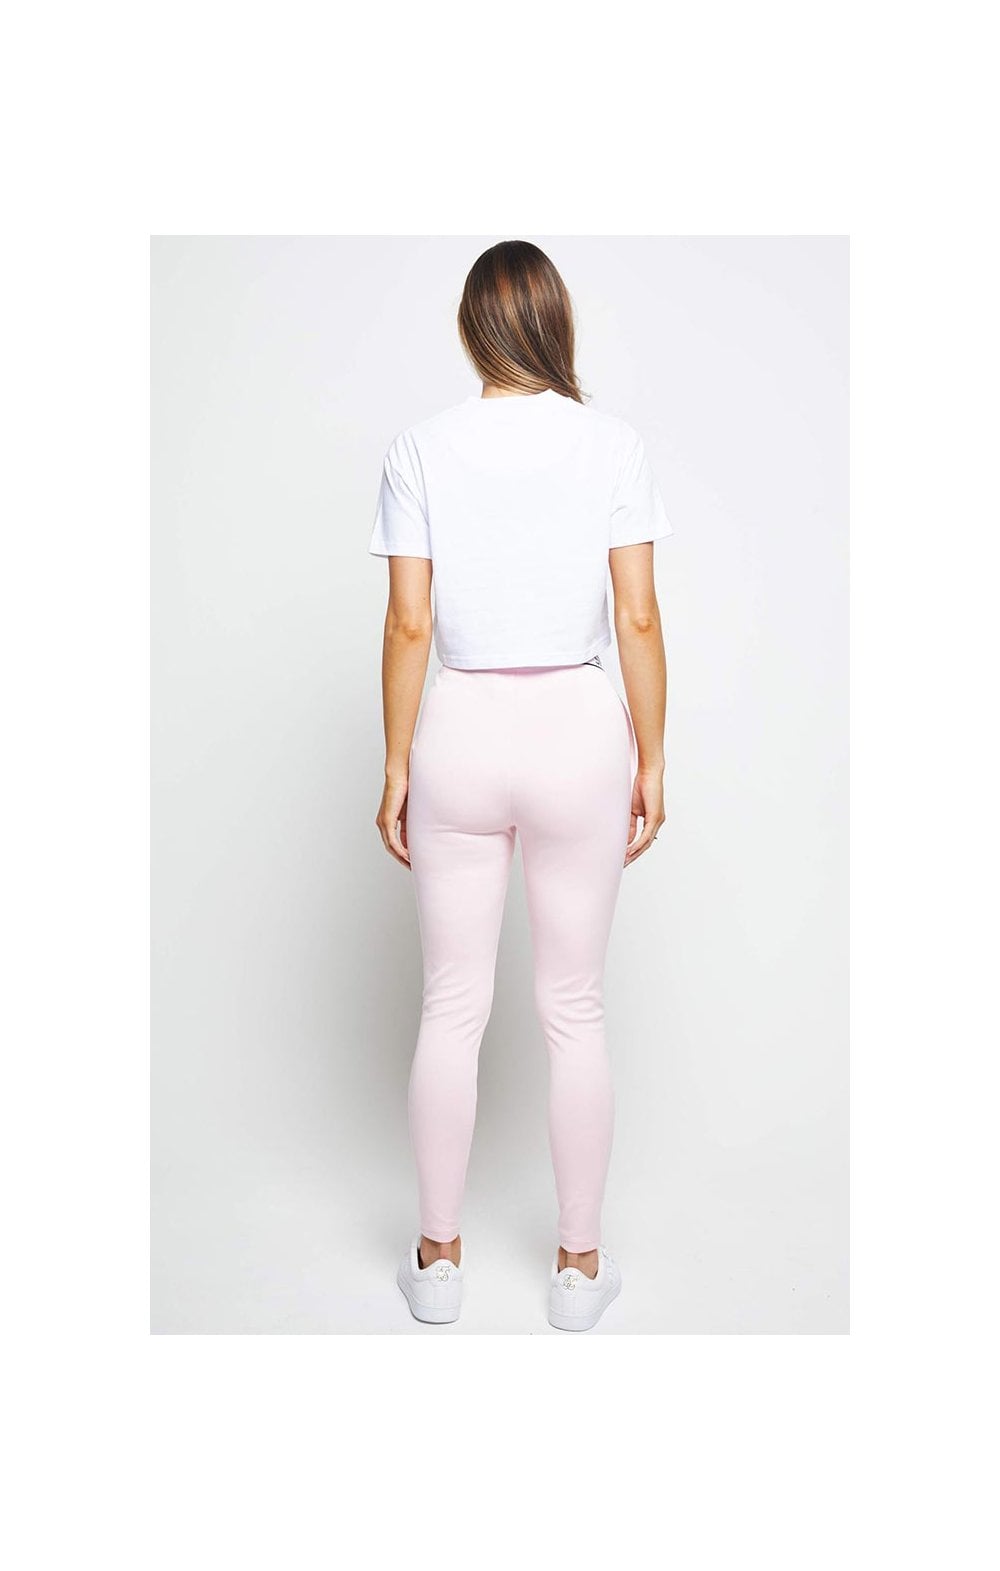 Load image into Gallery viewer, SikSilk Tape Athlete Pants – Pink (4)